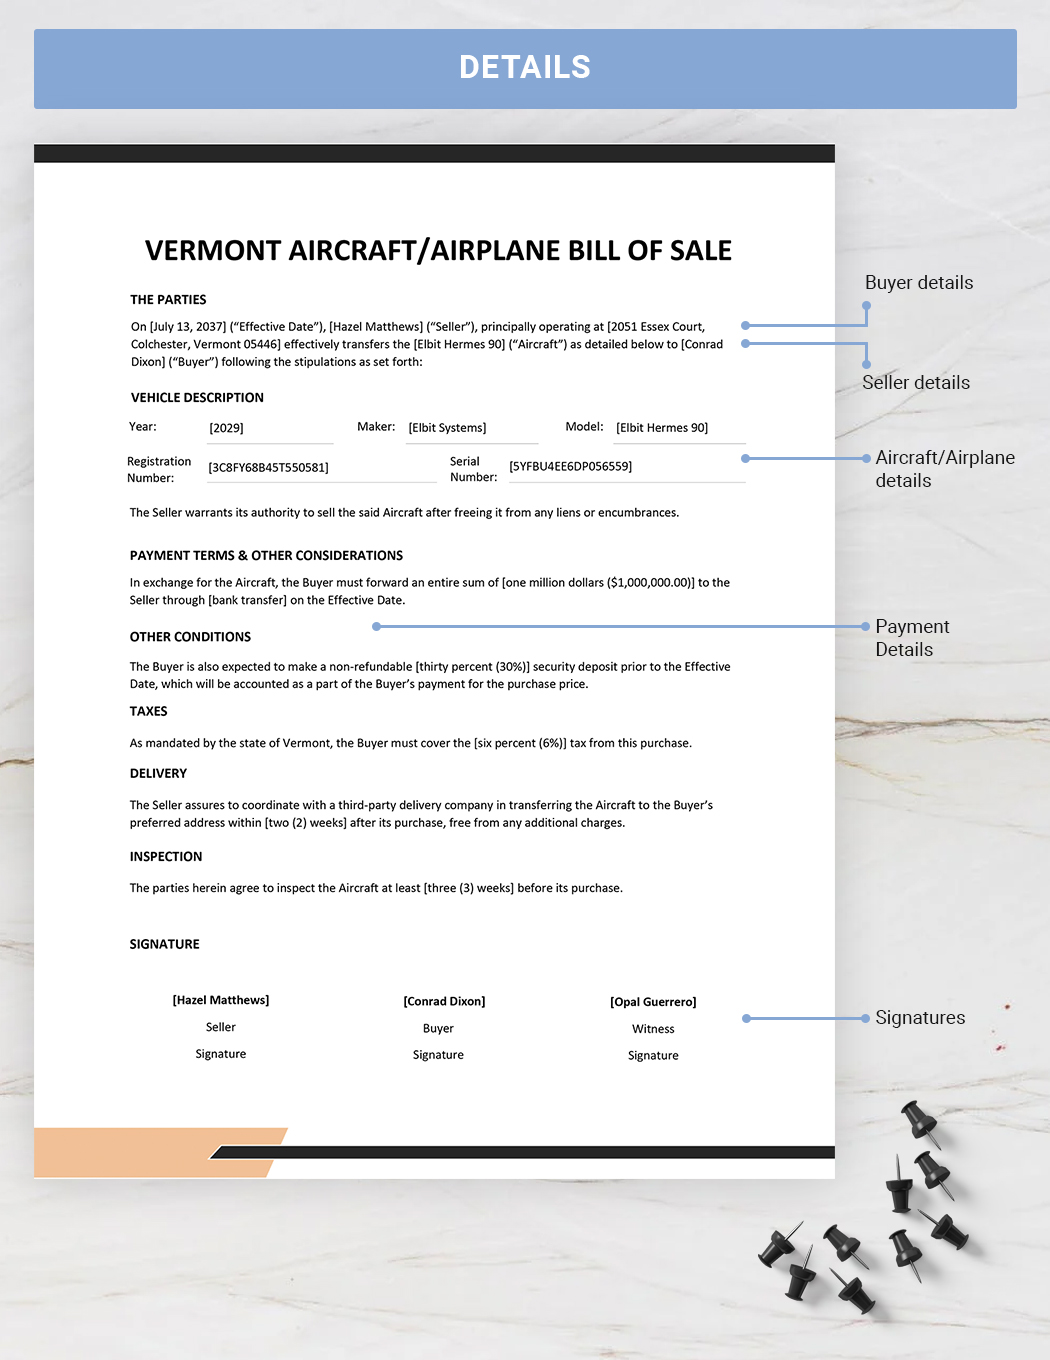 Vermont Aircraft / Airplane Bill of Sale Template